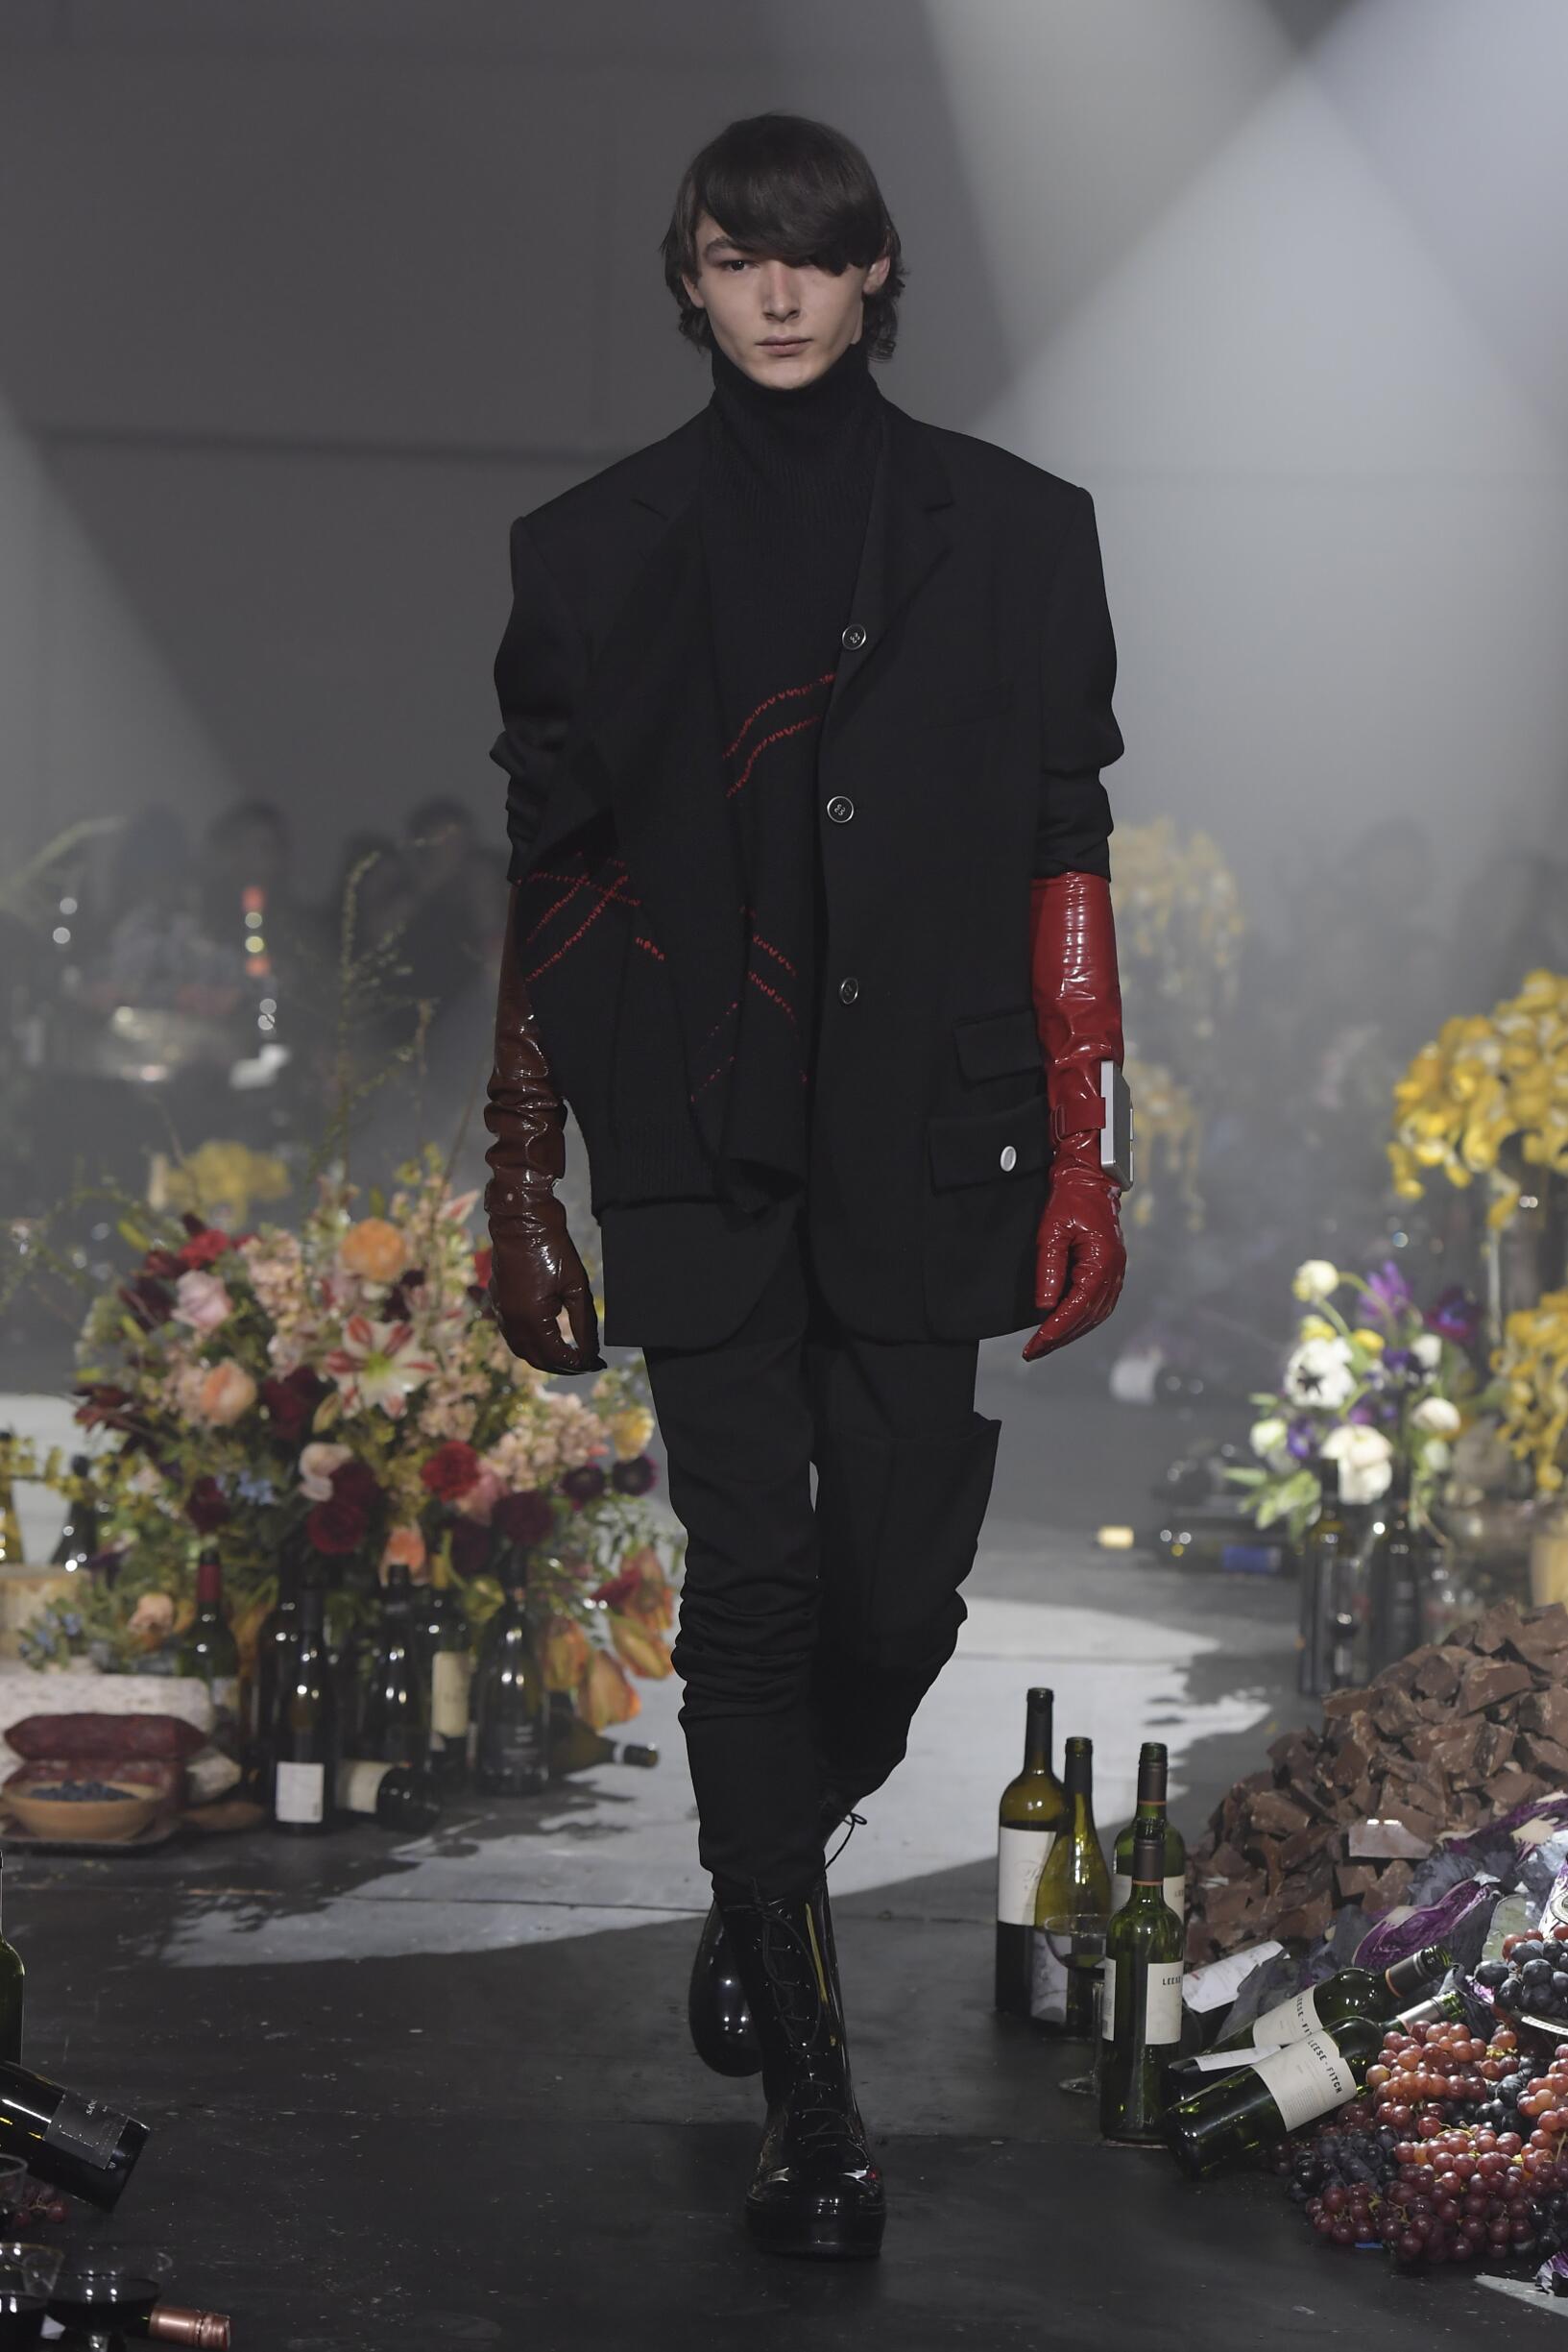 RAF SIMONS FALL WINTER 2018 MEN’S COLLECTION | The Skinny Beep